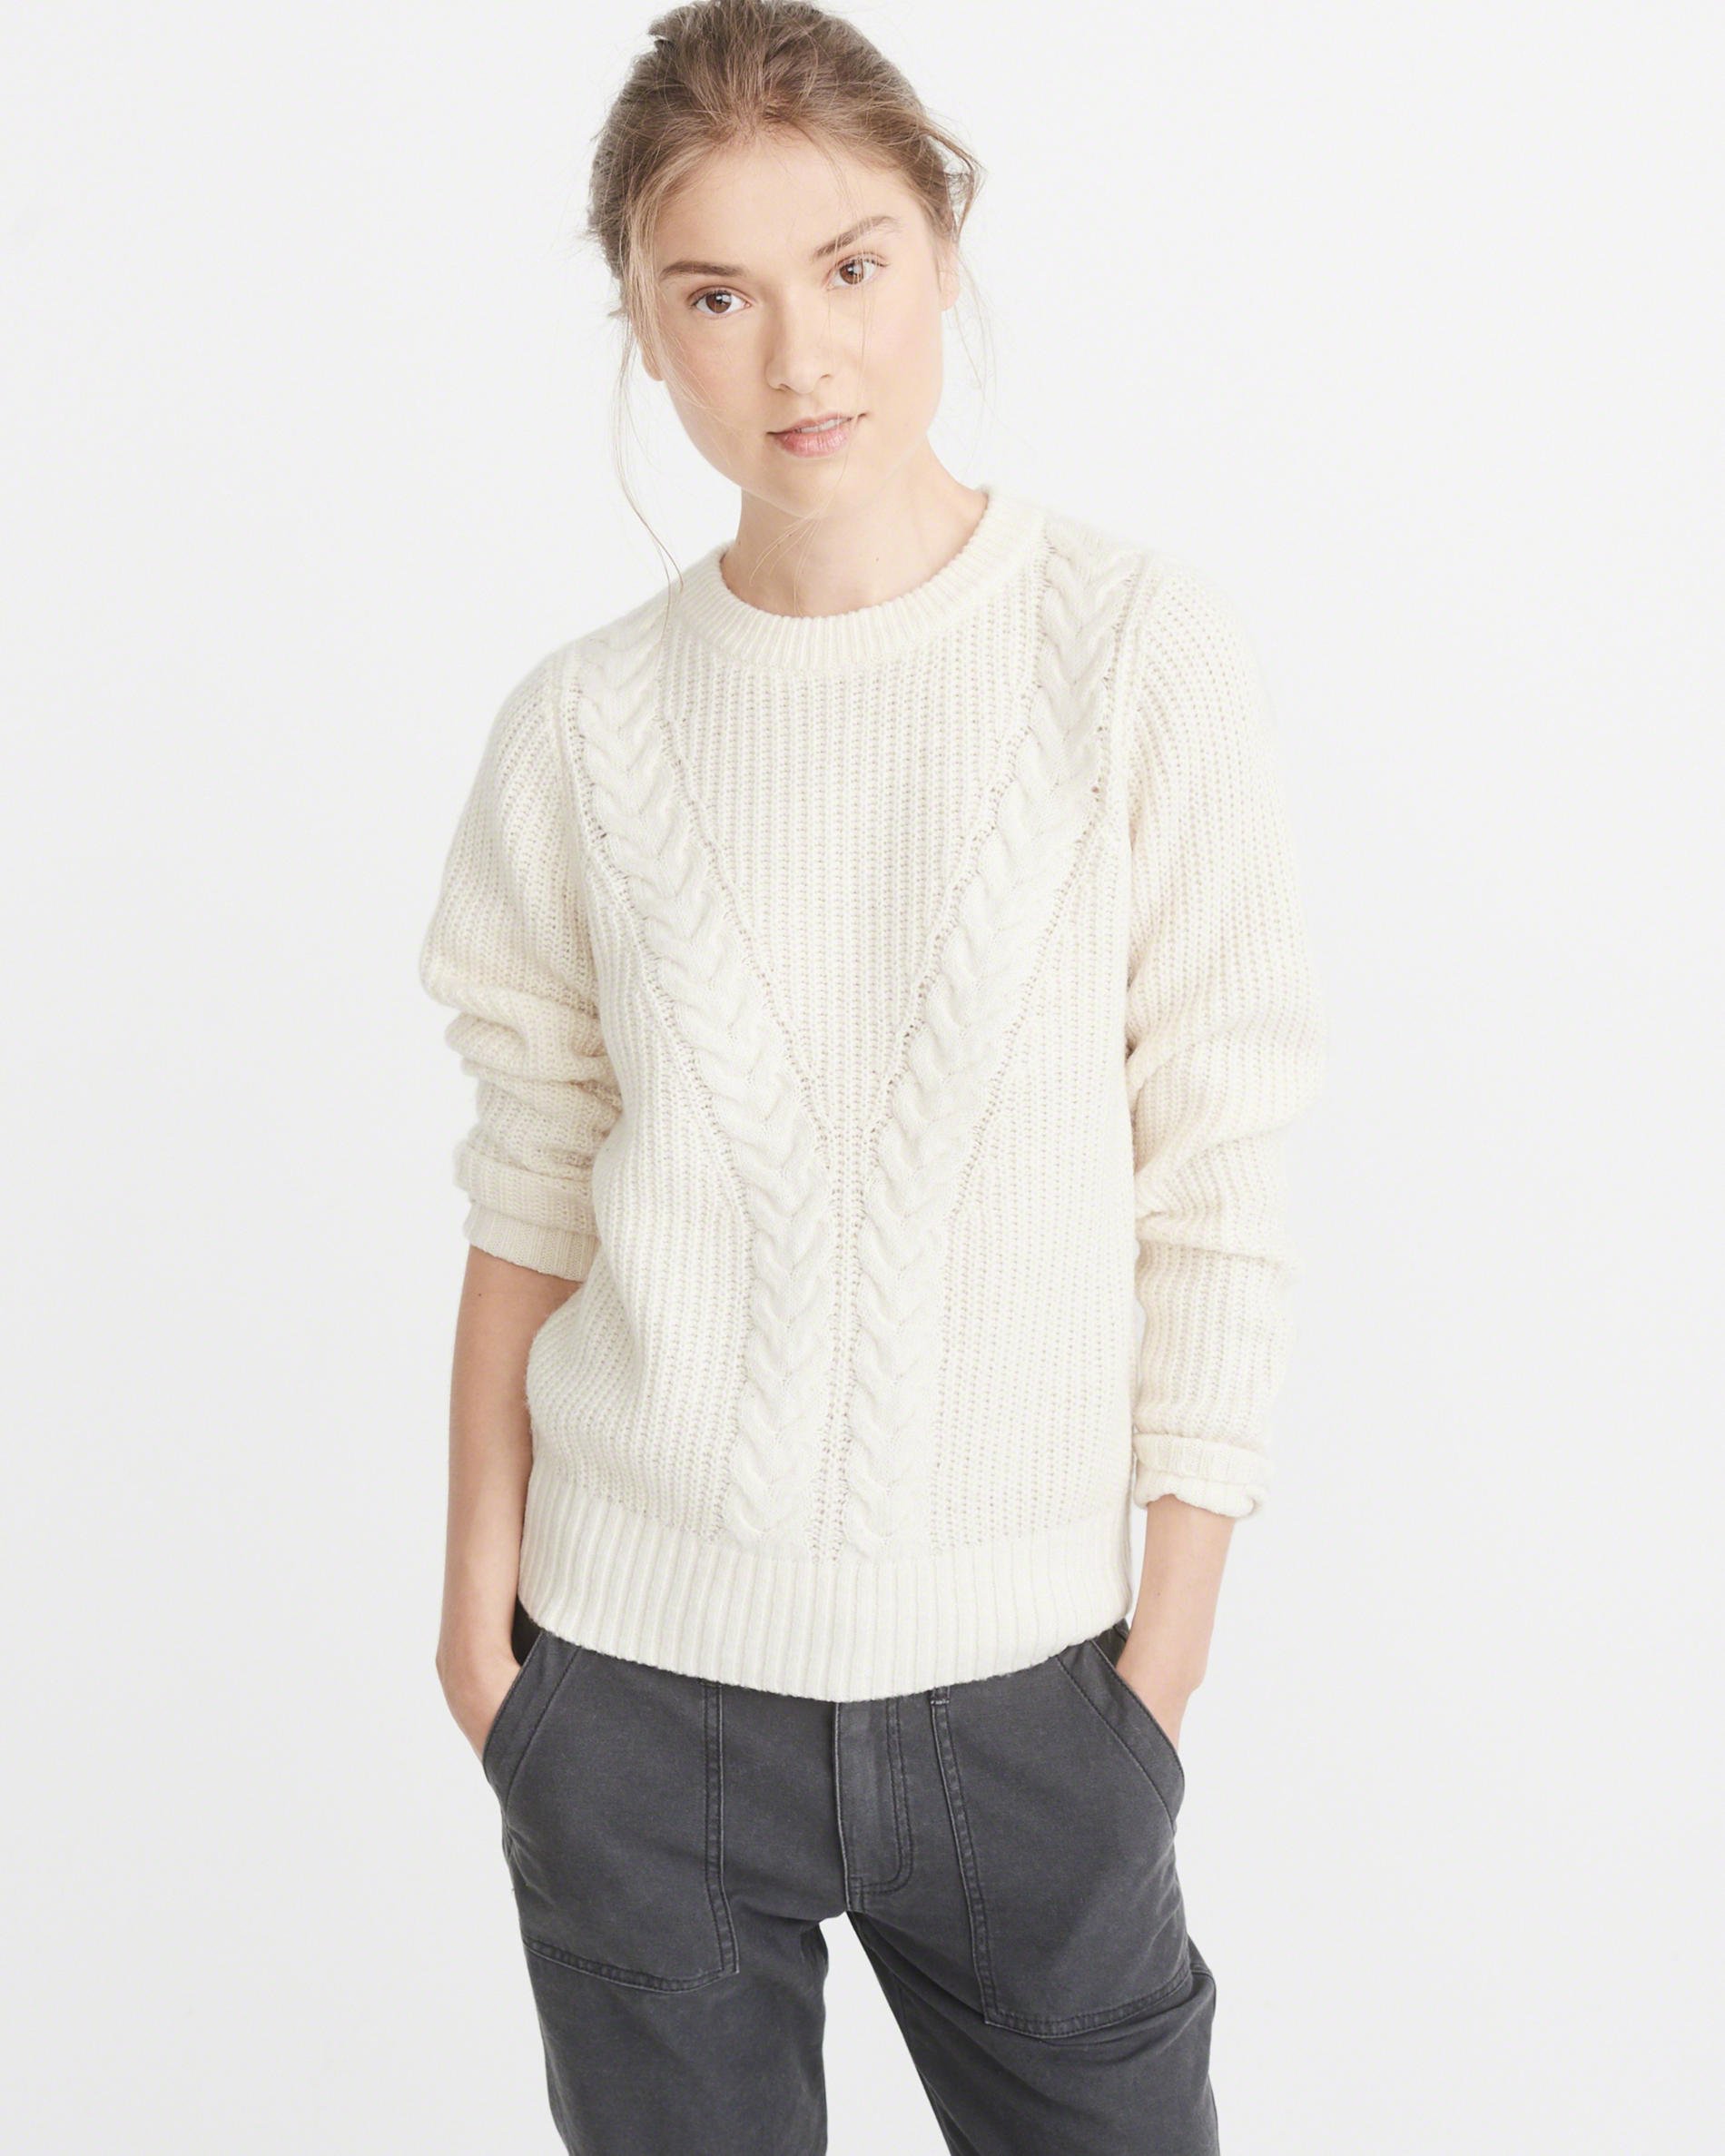 Abercrombie & Fitch cable knit sweater